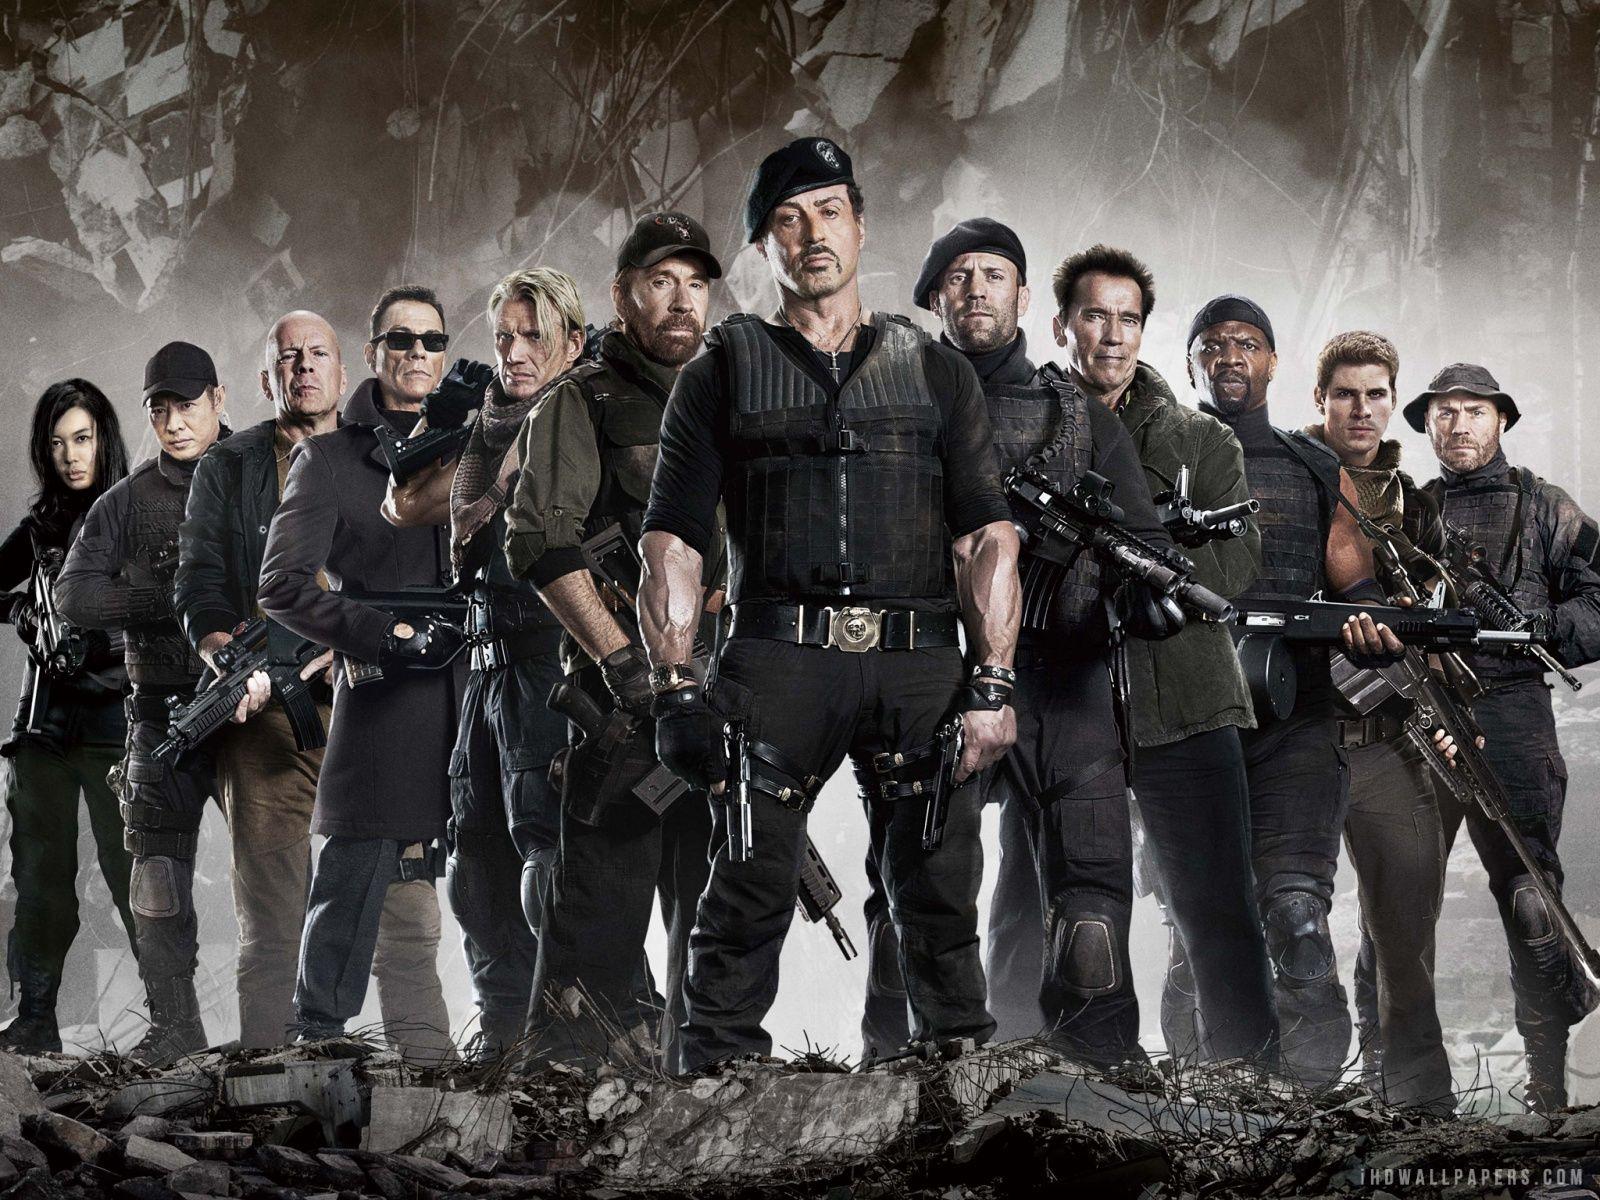 1920x1080px The Expendables 403.84 KB